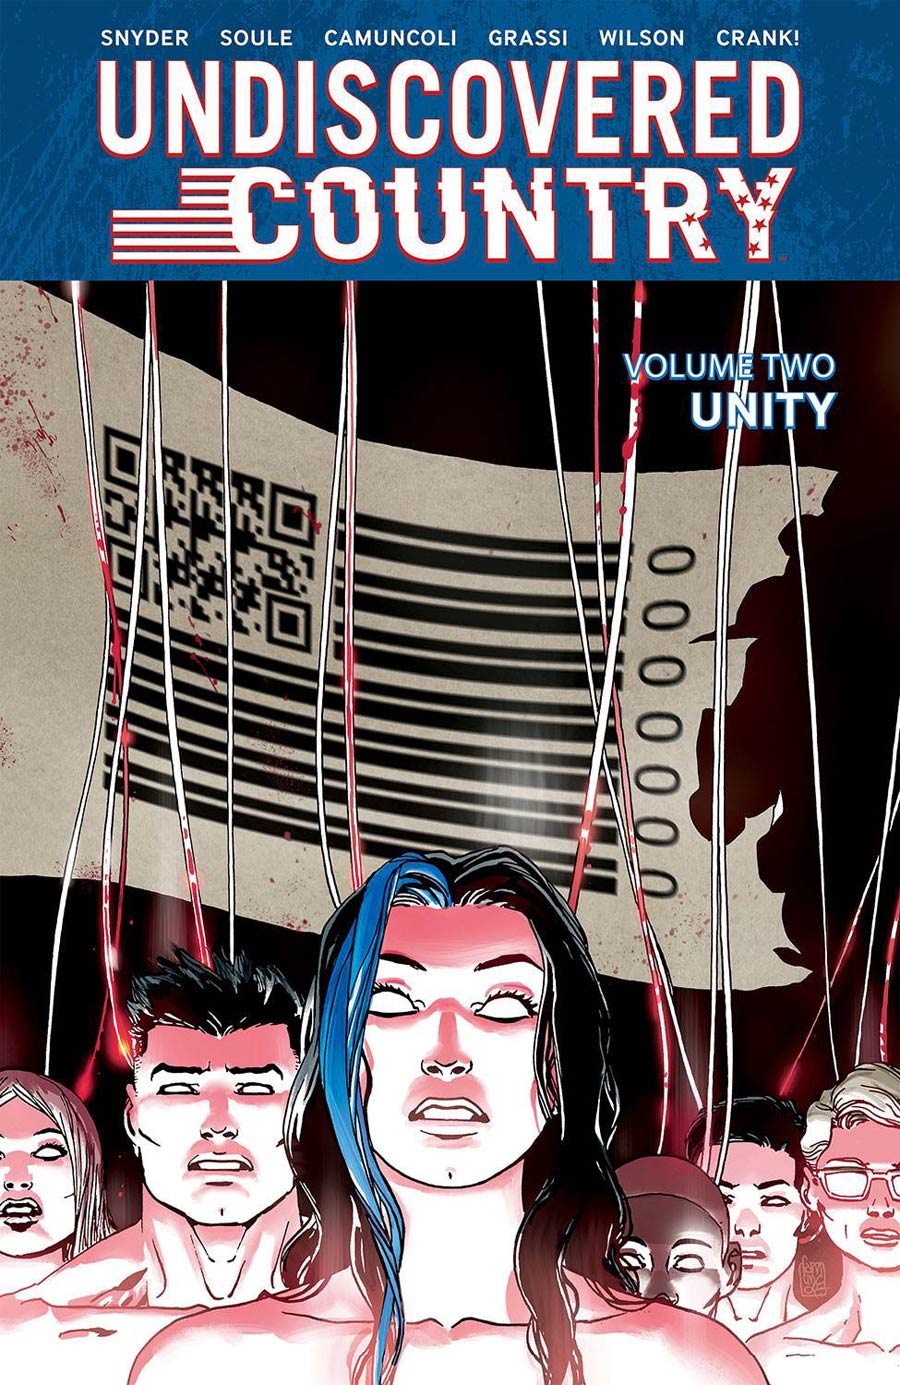 Undiscovered Country Vol 2 Unity TP